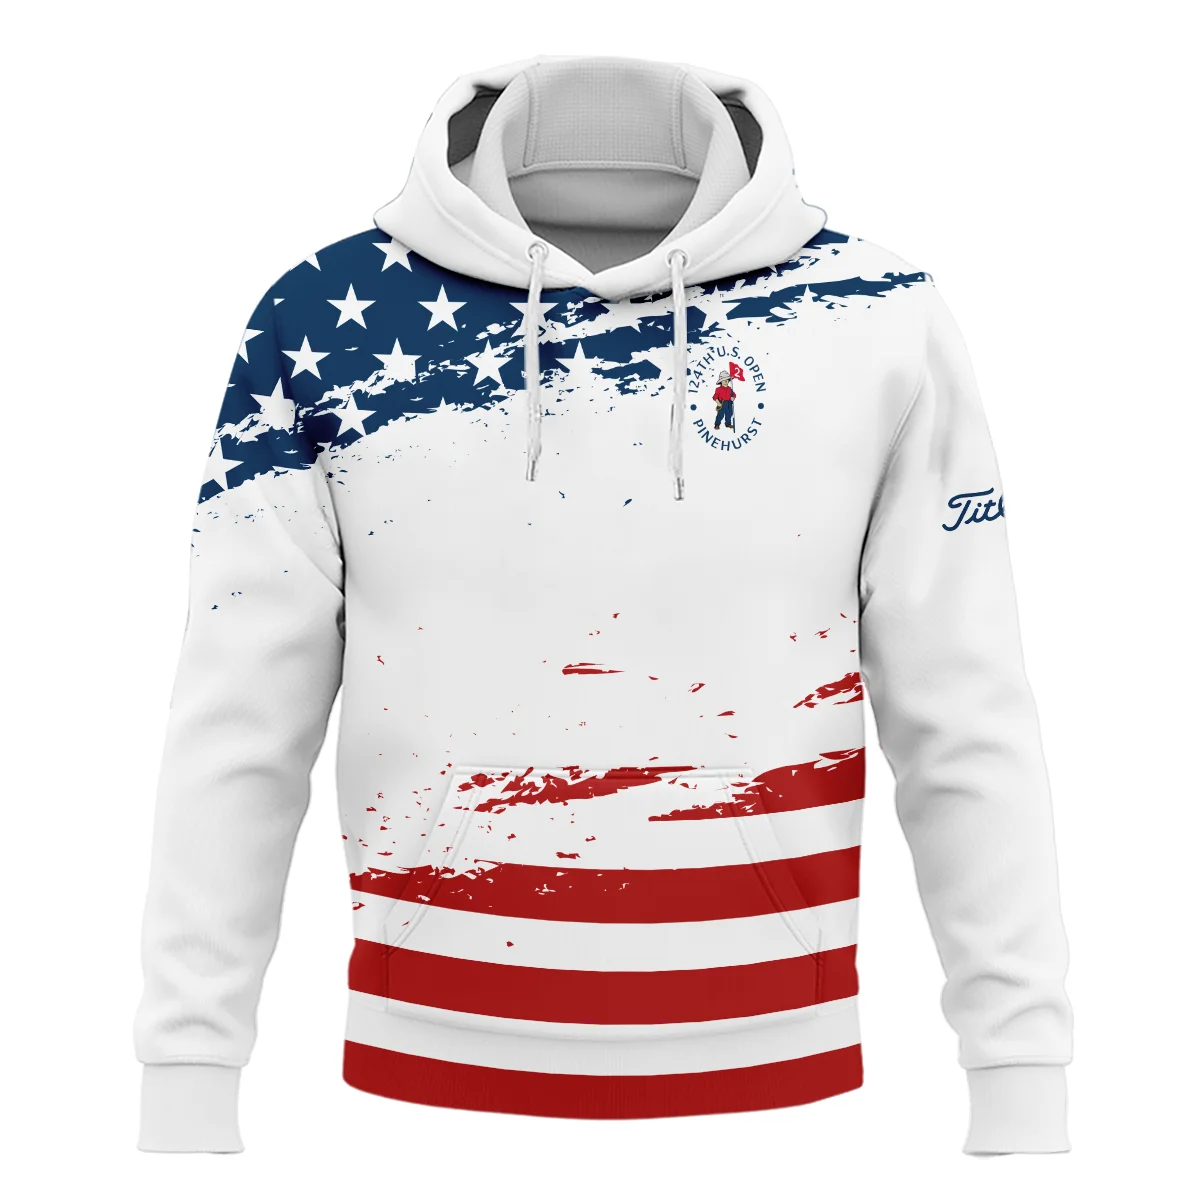 124th U.S. Open Pinehurst Special Version Titleist Hoodie Shirt Blue Red White Color Hoodie Shirt